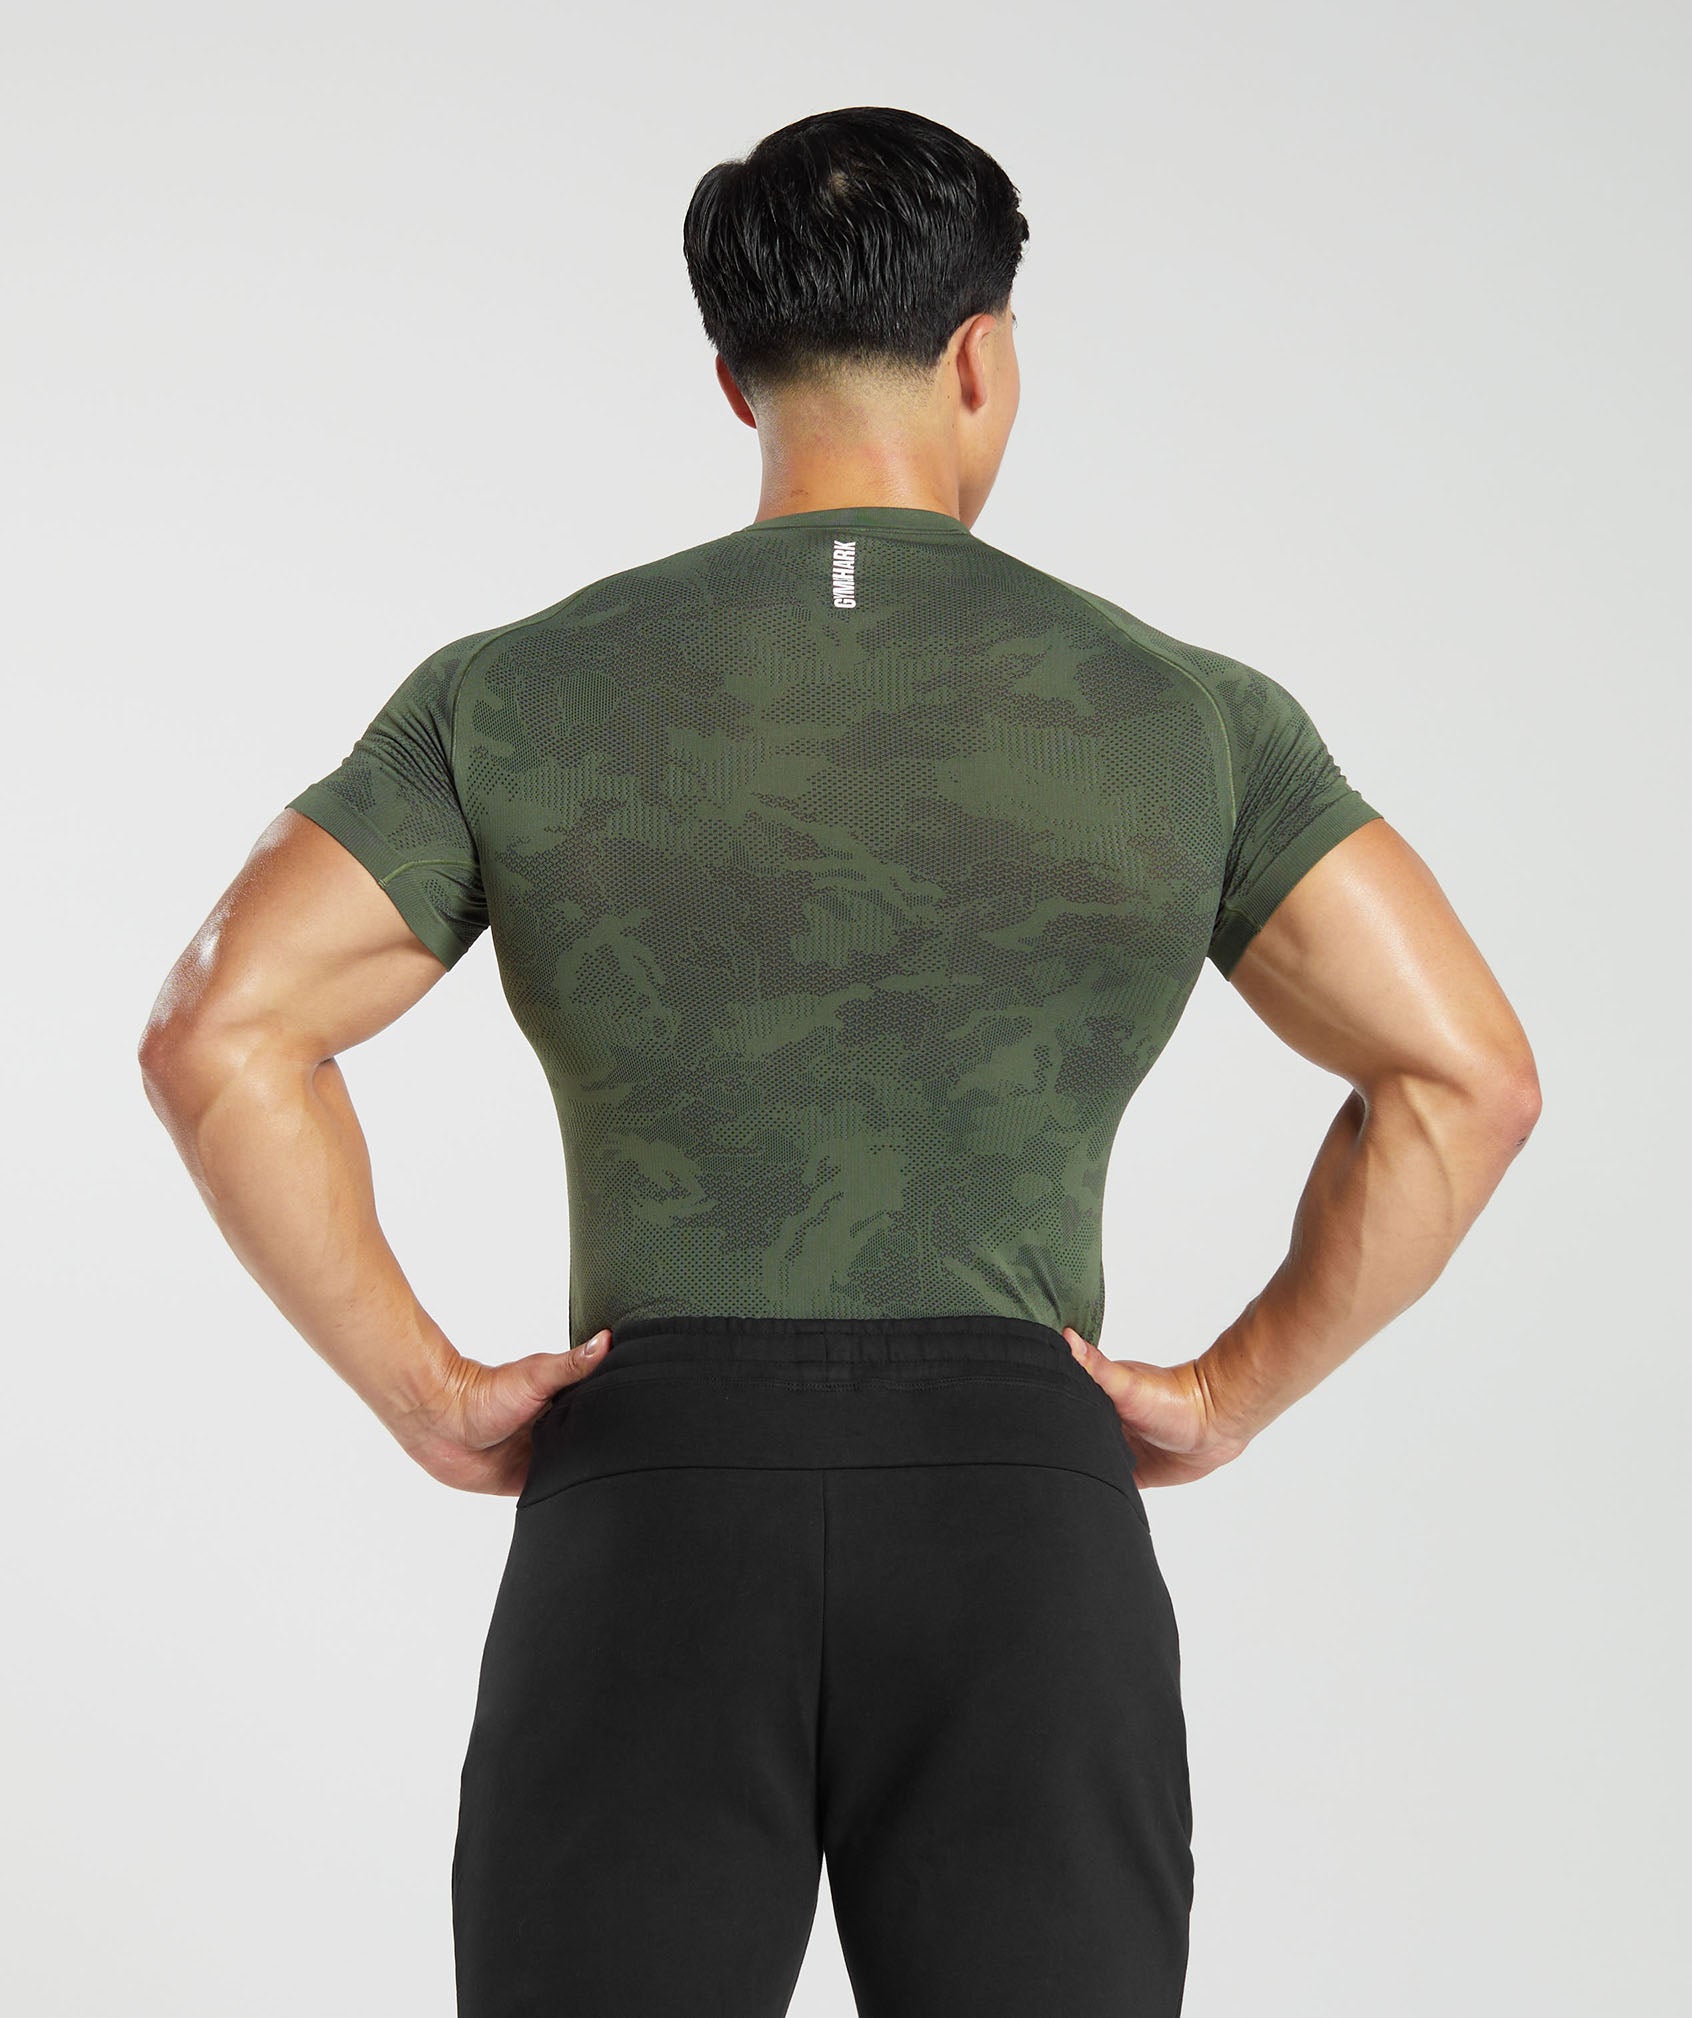 Geo Seamless T-Shirt in Core Olive/Black - view 2